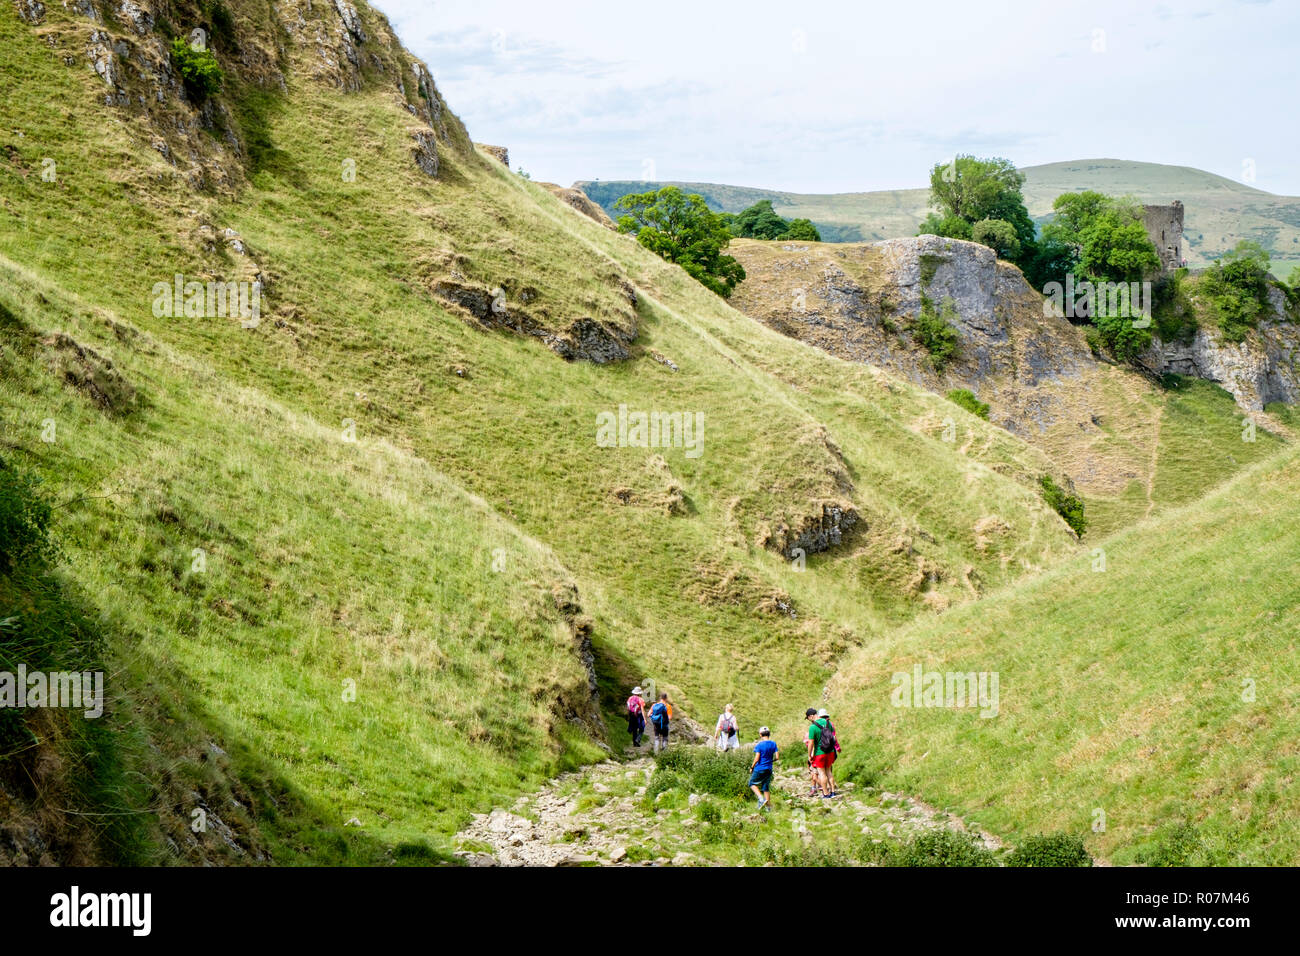 People in the Derbyshire countryside. Walkers on the Limestone Way in Cave Dale with Peveril Castle in the distance, Derbyshire, Peak District, UK Stock Photo